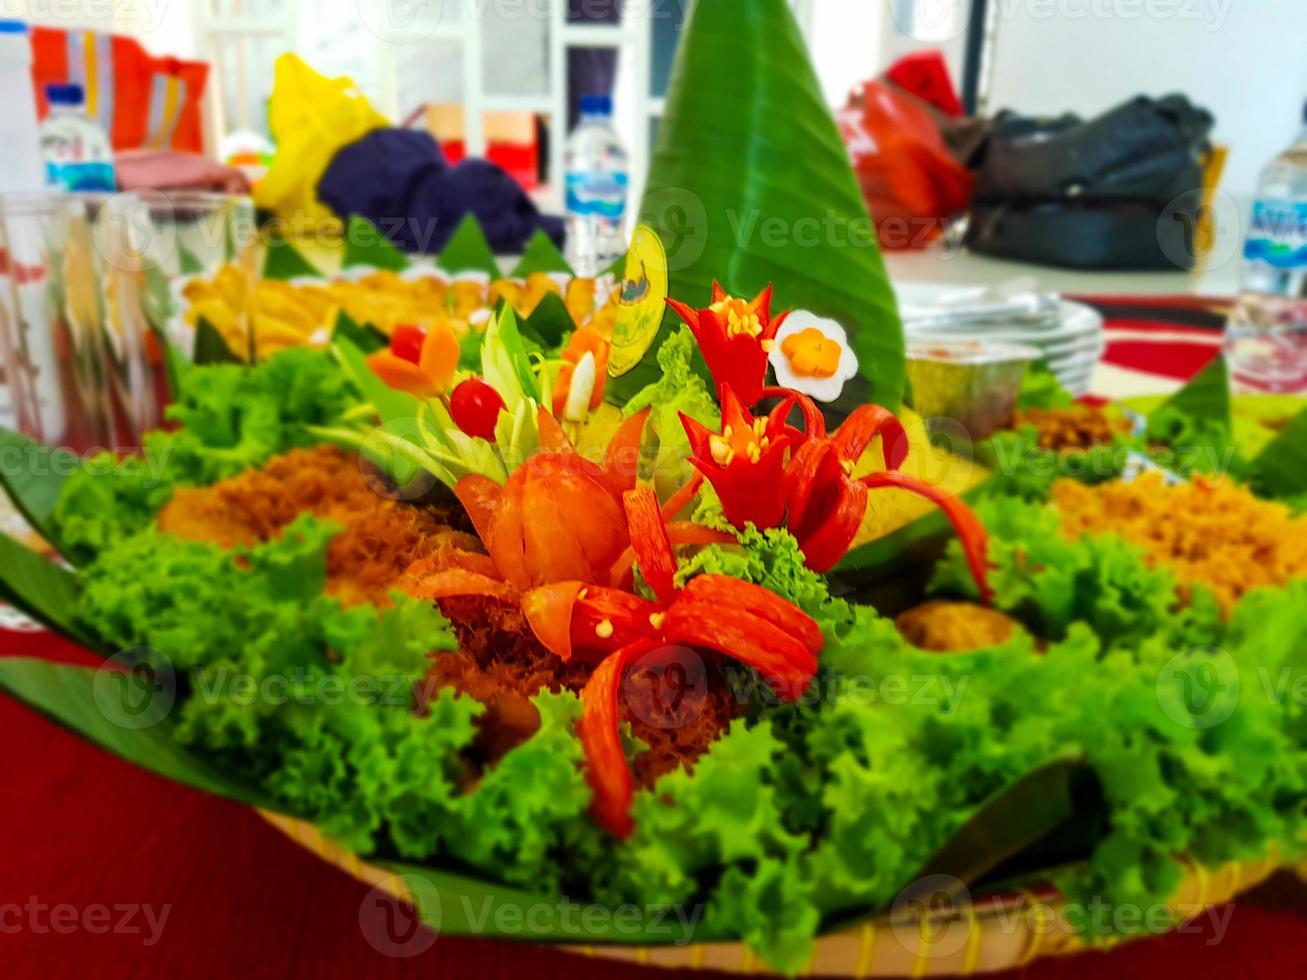 Nasi Tumpeng, yellow rice that is shaped into a cone and equipped with side dishes and vegetables around it. photo